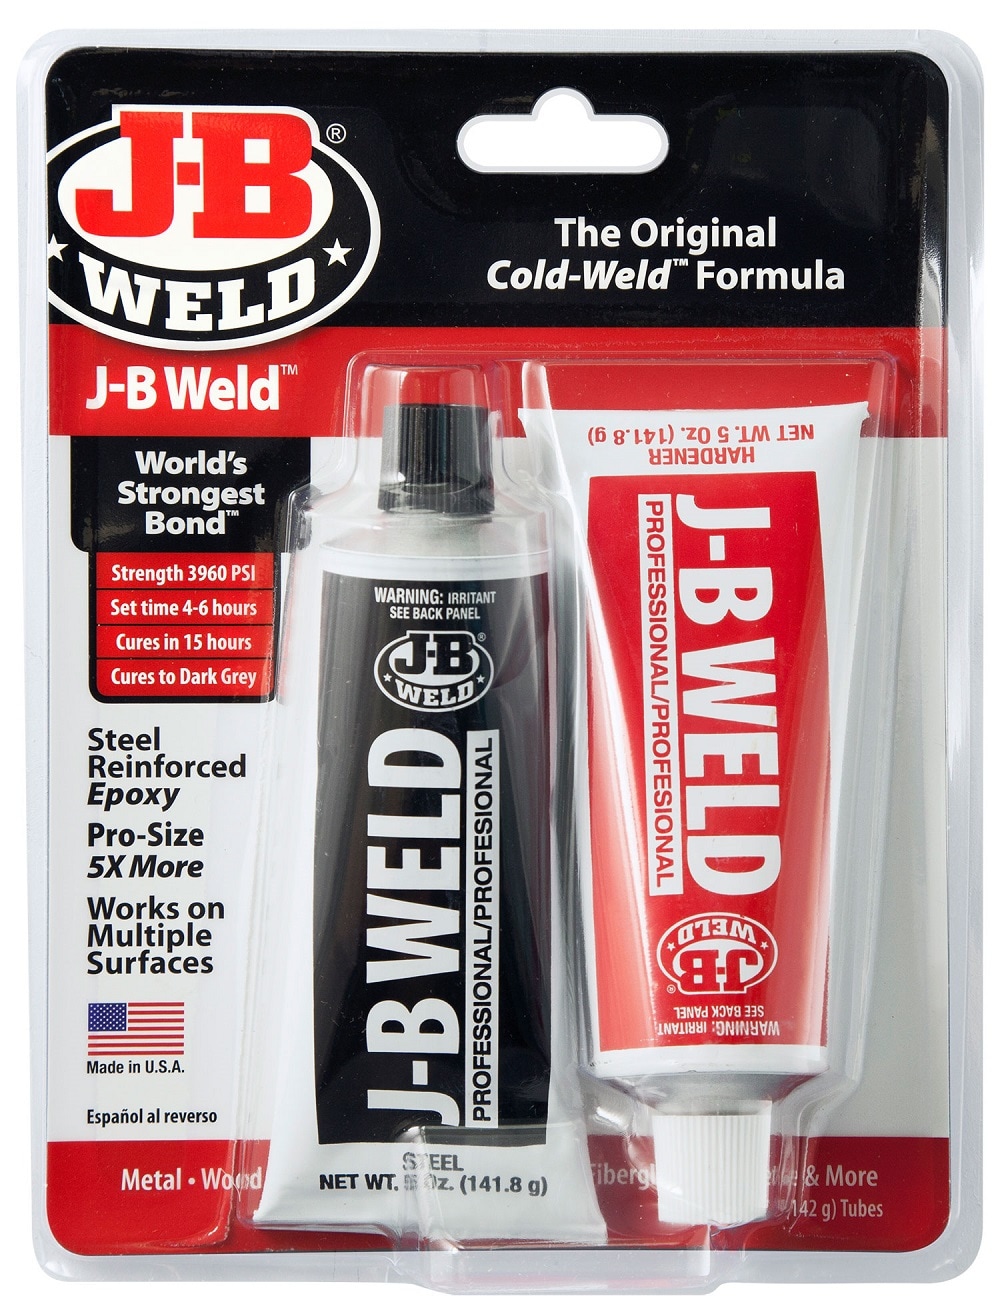 Generic J-B Weld Tabletop Epoxy Resin, 32oz Kit, Cures Clear, Fast Cure  Time, UV Resistant, Minimal Bubbling, Scratch